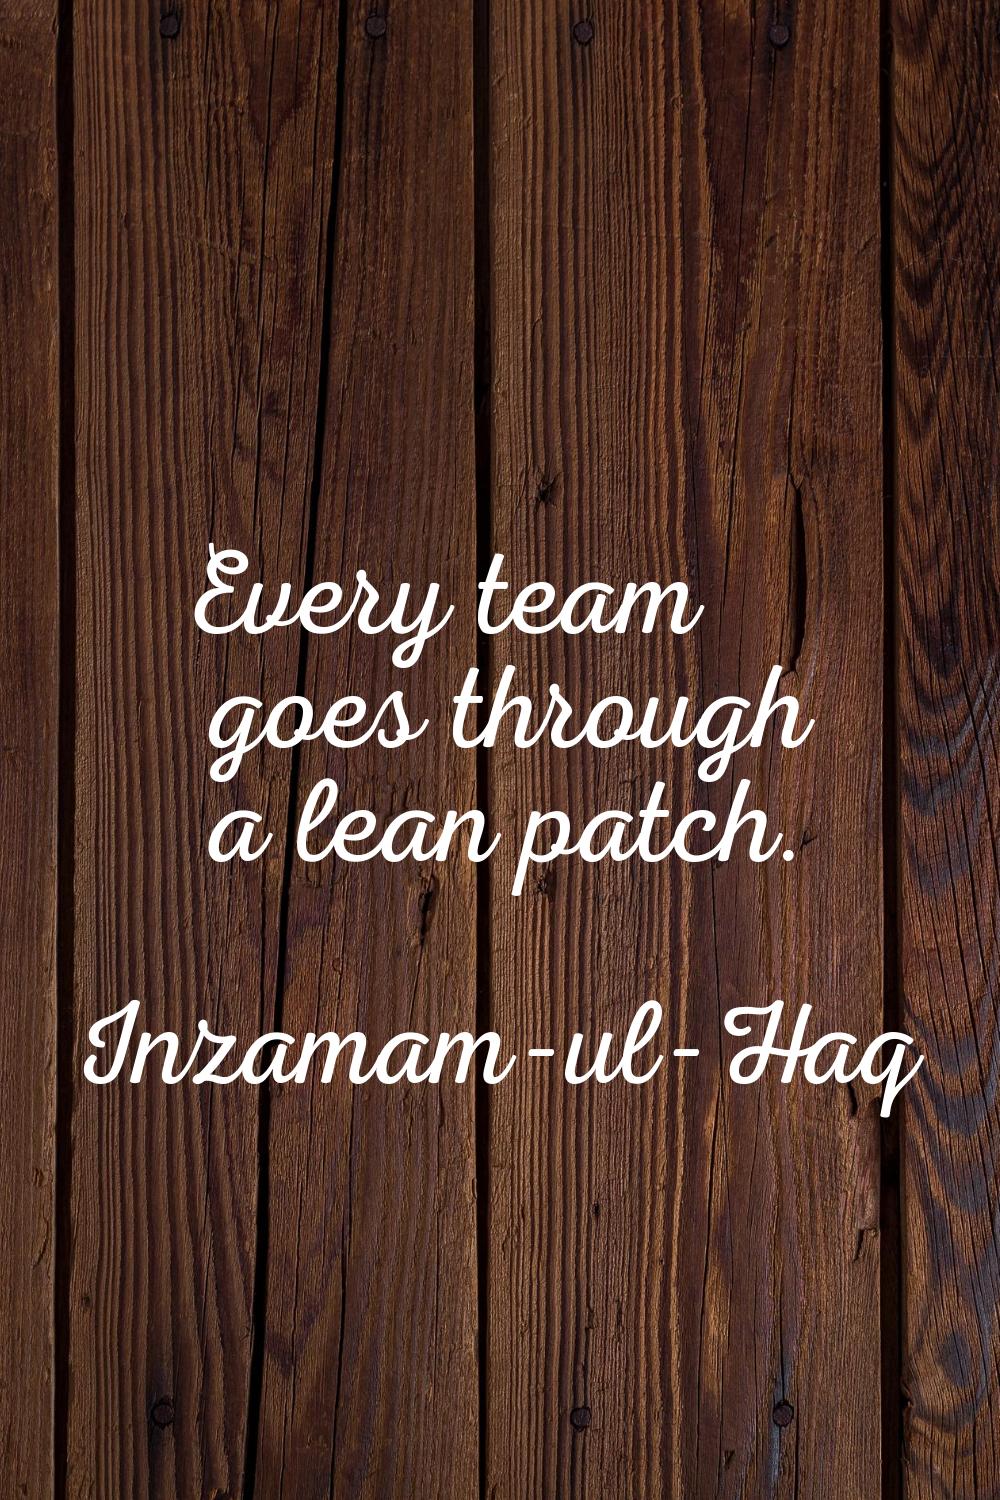 Every team goes through a lean patch.